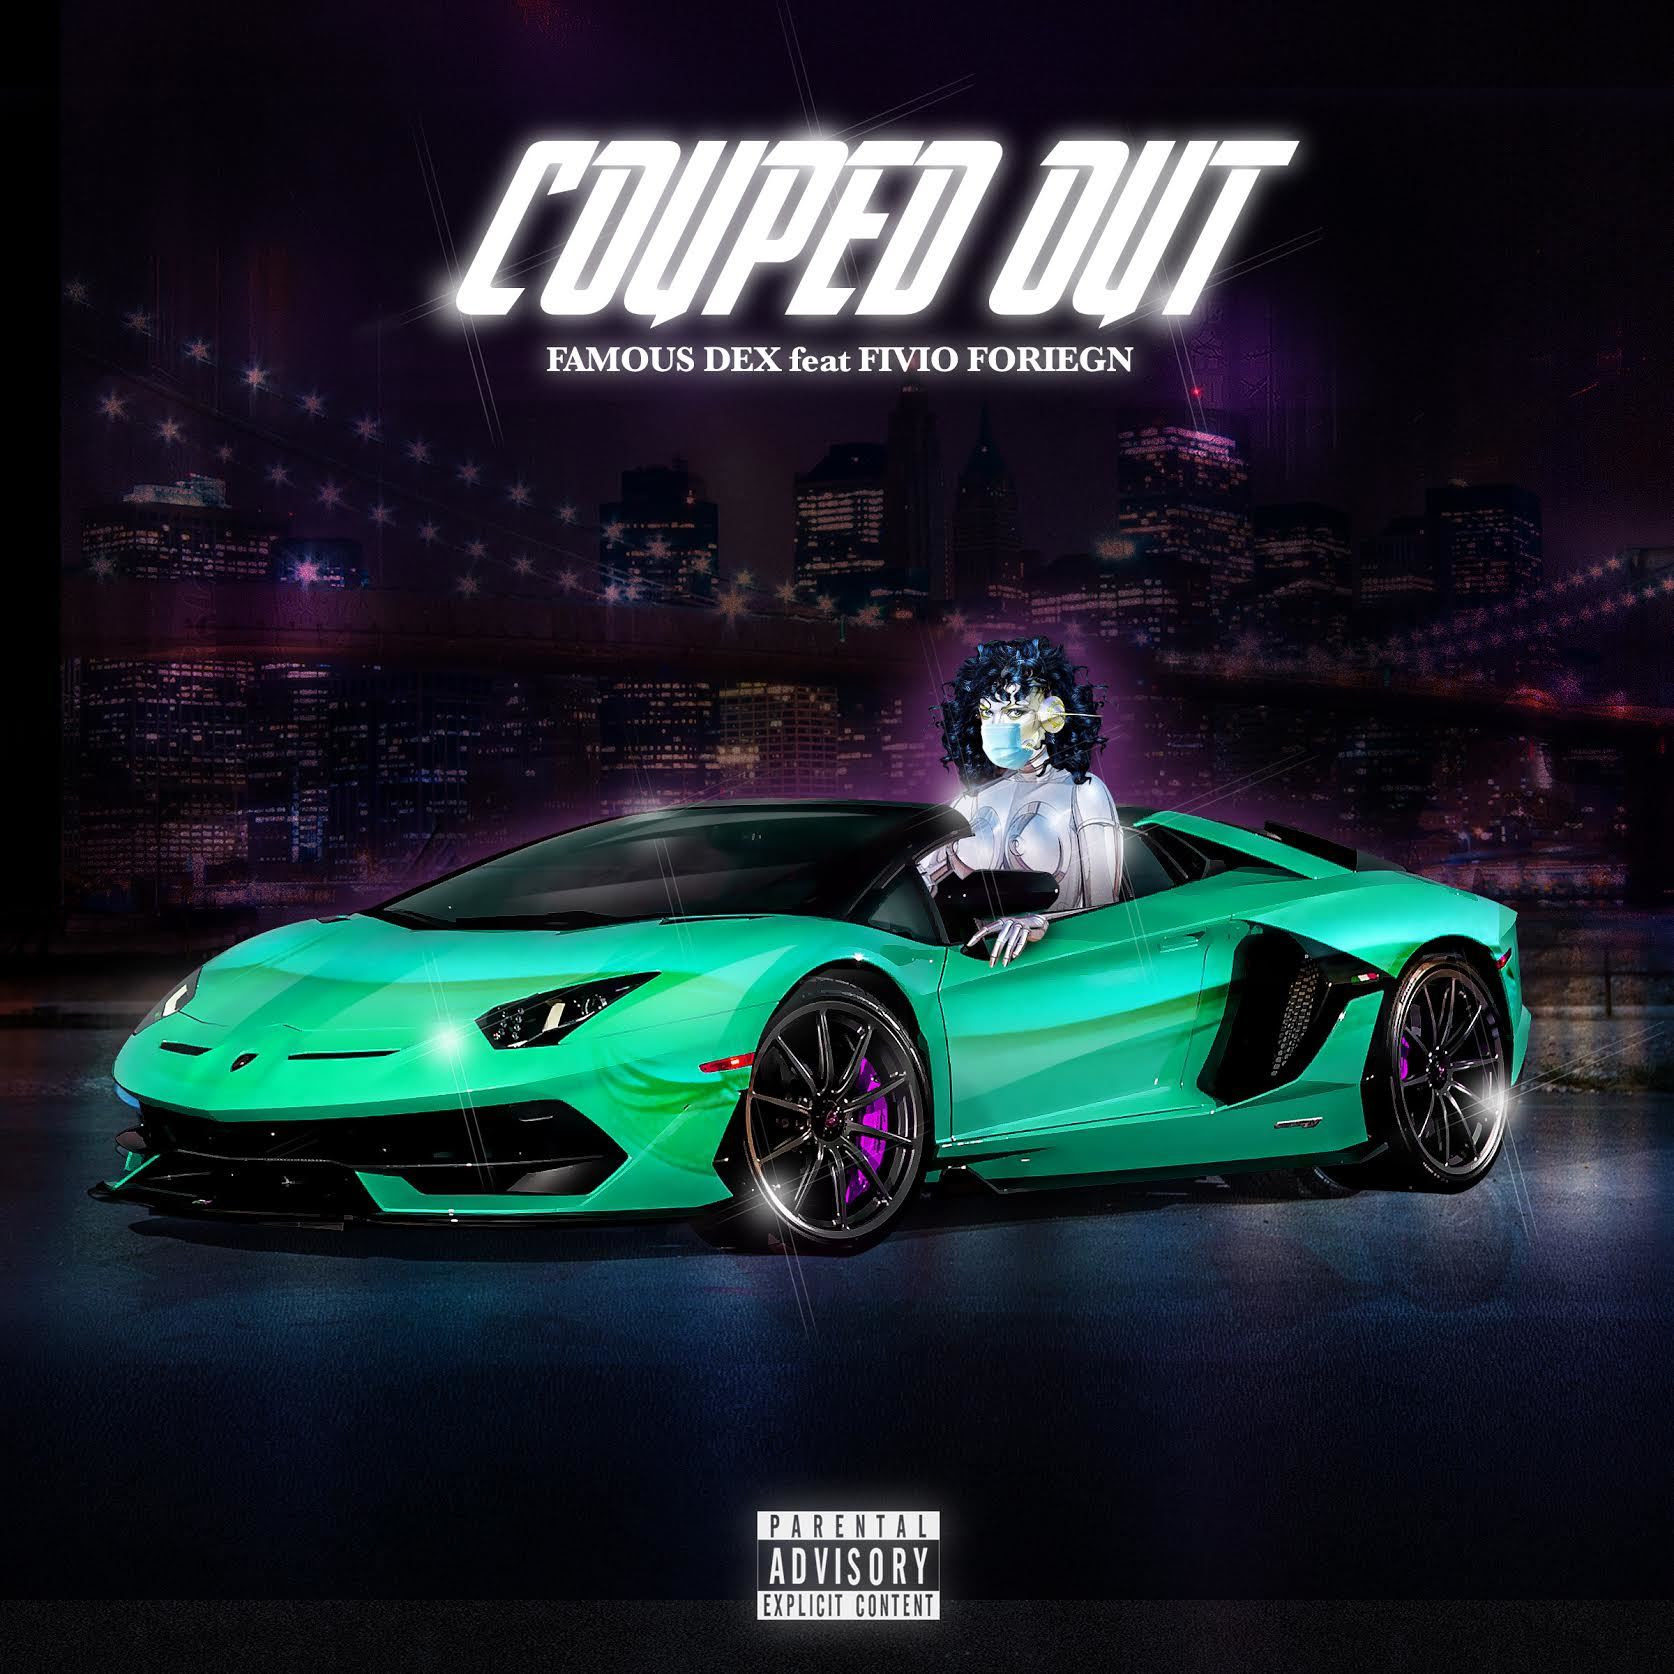 Famous Dex & Fivio Foreign Join Forces For “Couped Out”